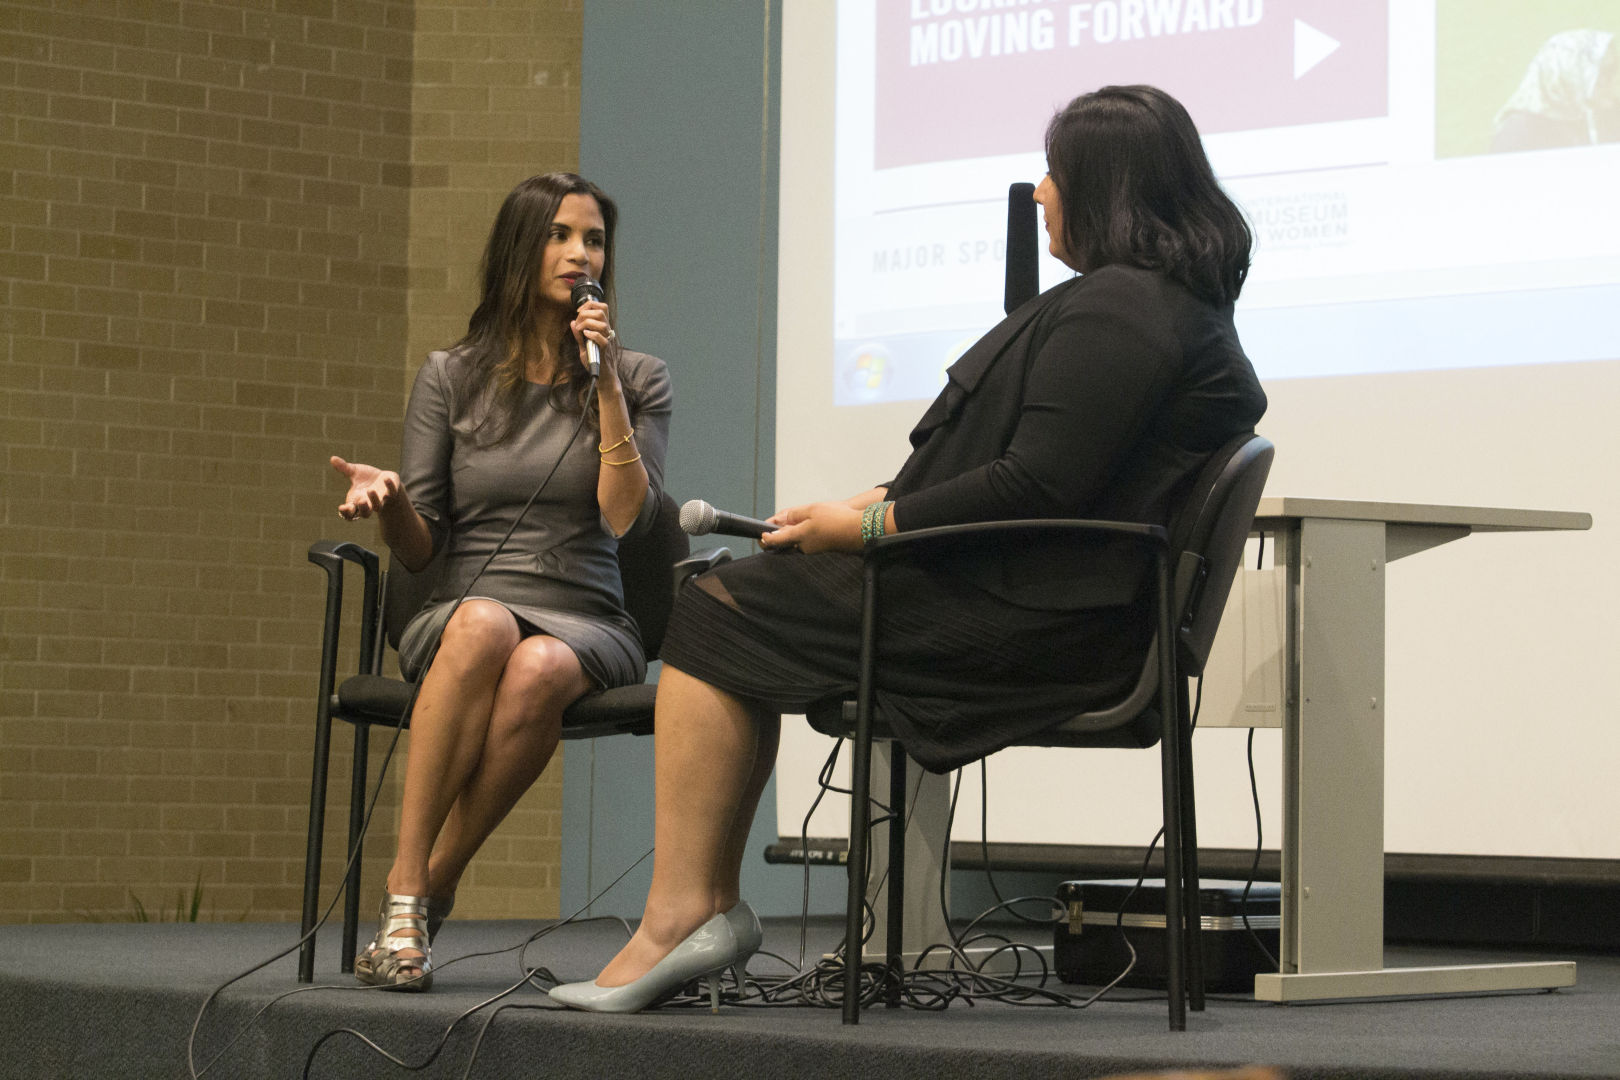 Houston-based journalist Eesha Pandit moderates the discussion of what UH students think of when they think of Muslim women. |Photo by Sara Samora/The Cougar